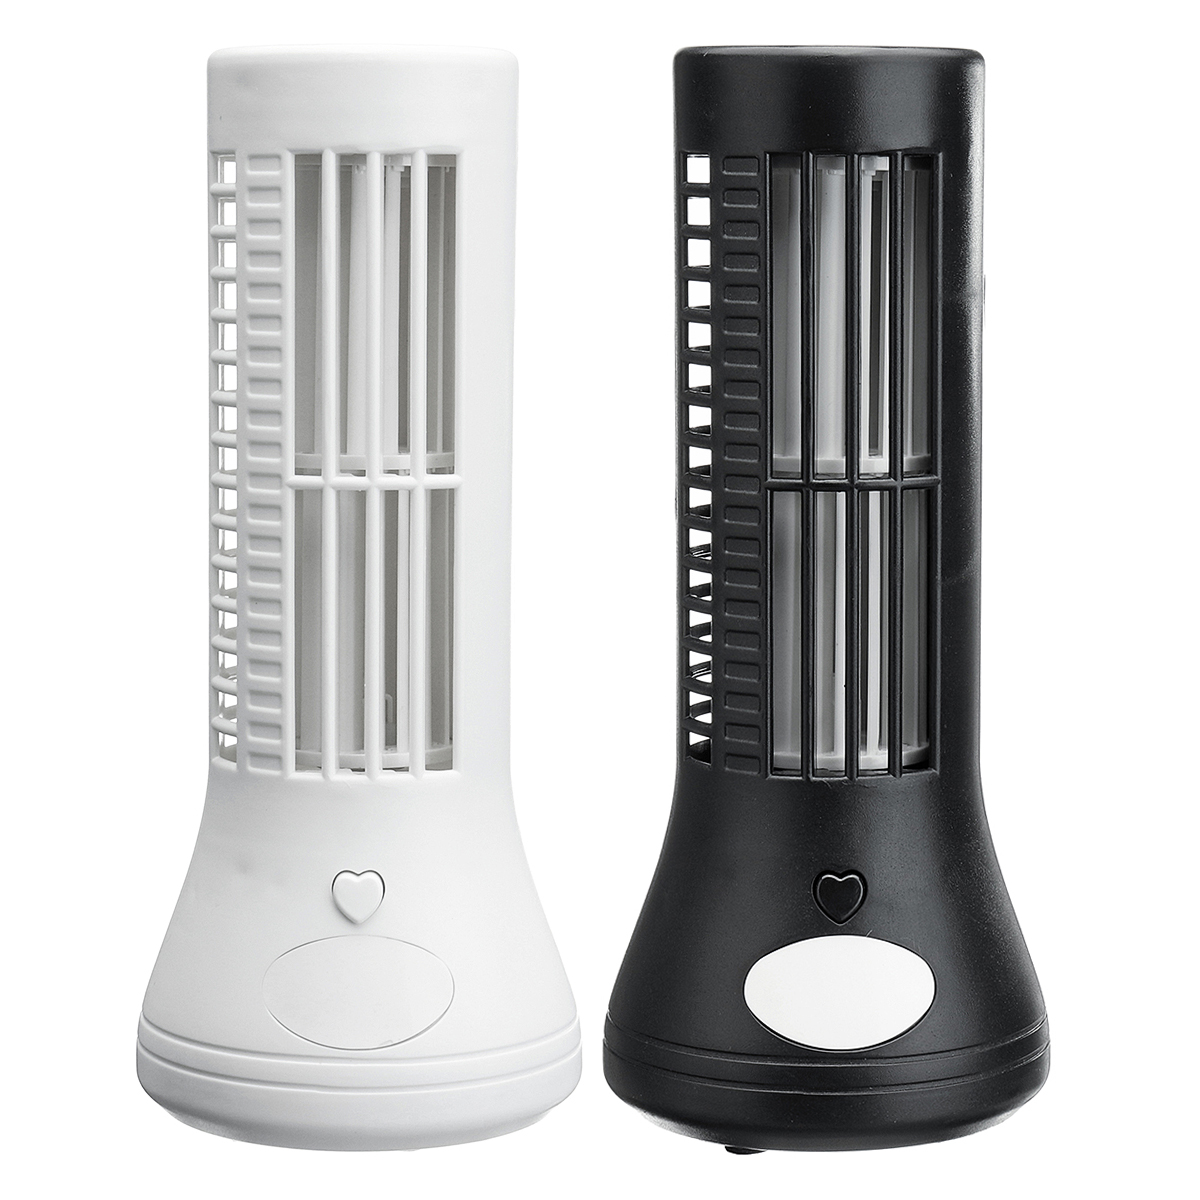 Portable-Fresh-Air-Cooler-Bladeless-Tower-Fan-Humidifier-Conditioning-Ionizer-1336042